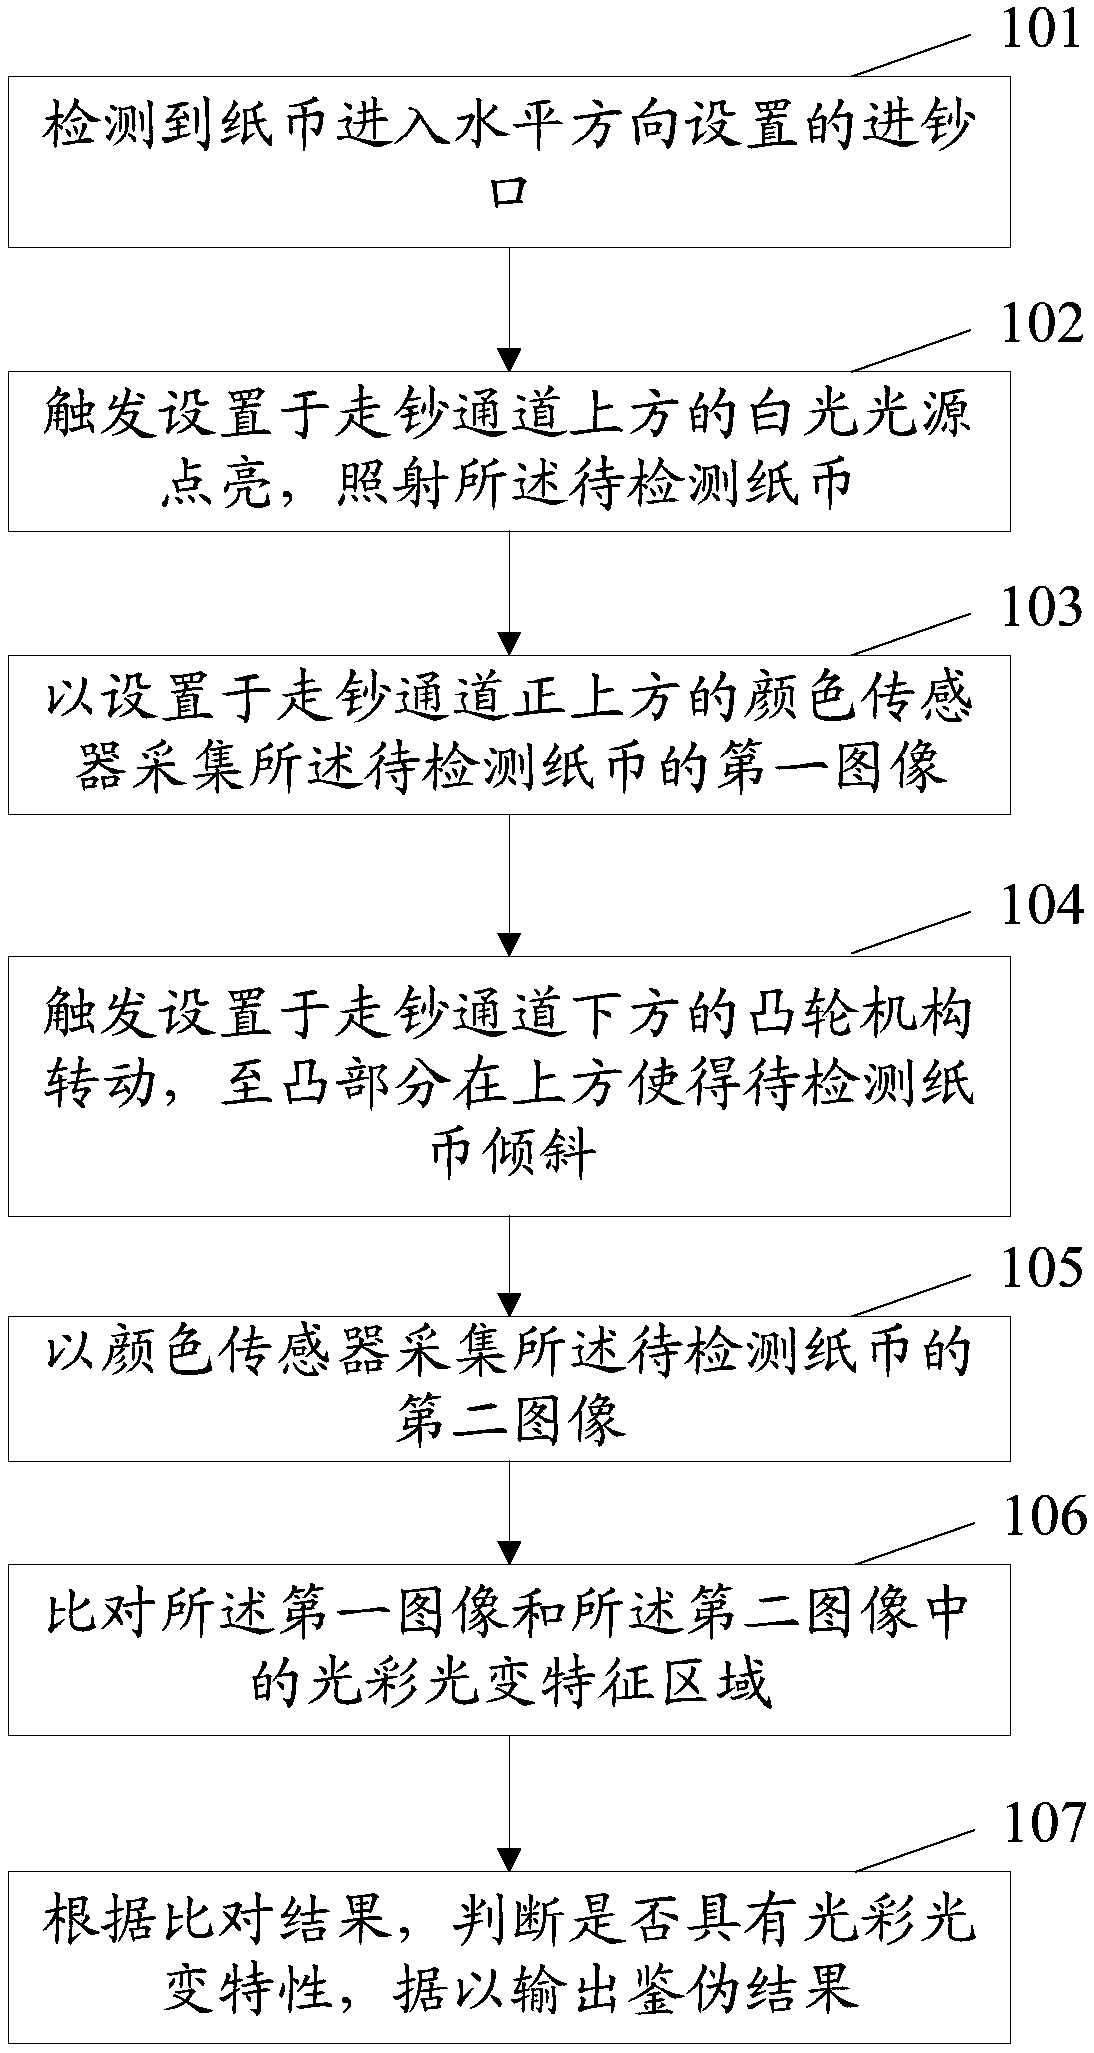 Paper currency authentication method based on light color light change anti-counterfeiting characteristics